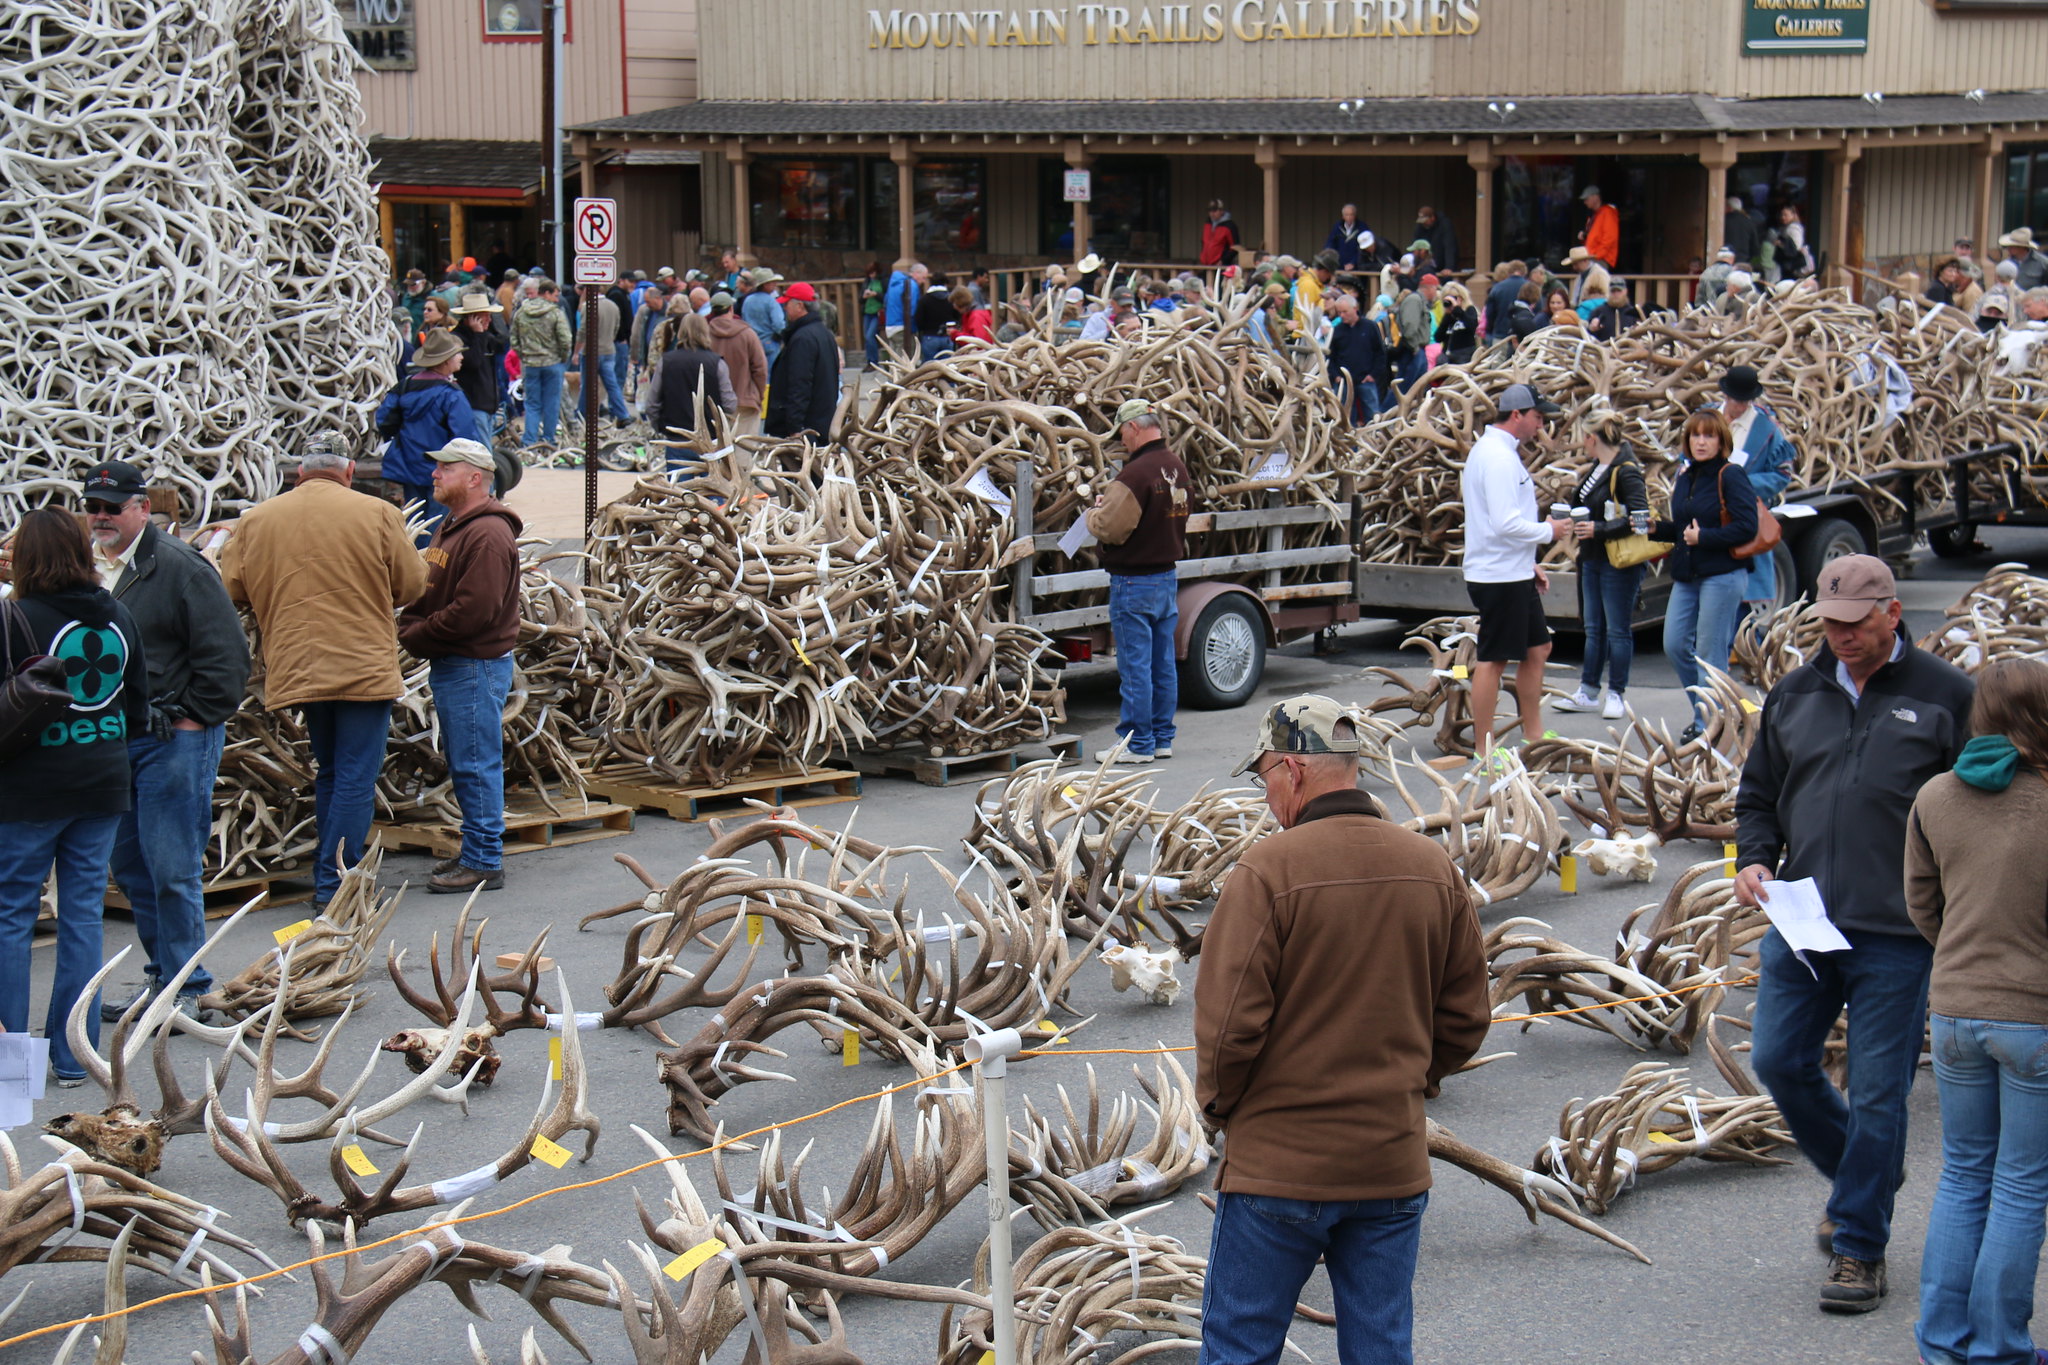 An antler auction in Wyoming.